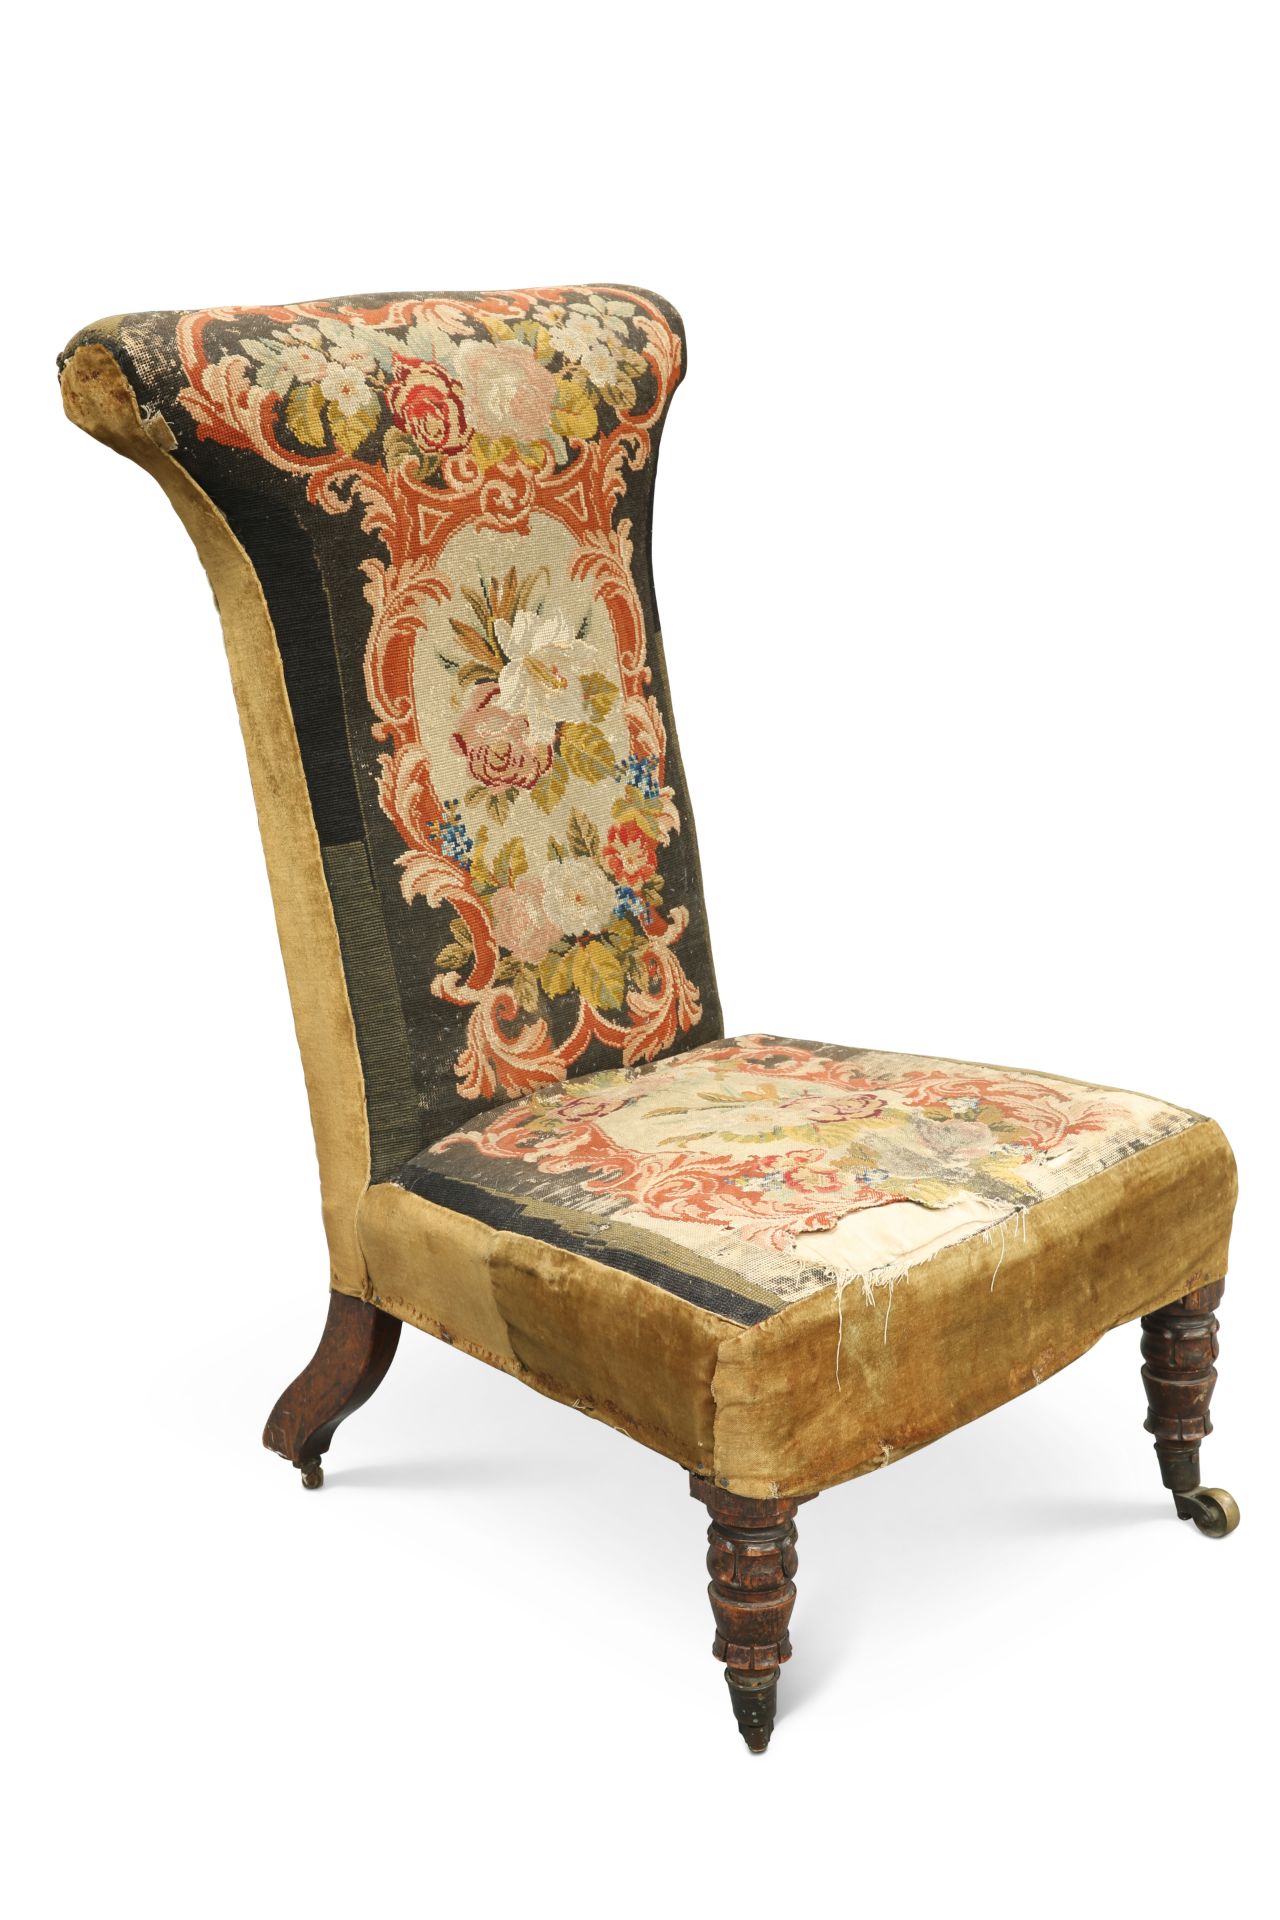 A 19TH CENTURY FAUX ROSEWOOD AND NEEDLEWORK PRIE-DIEU